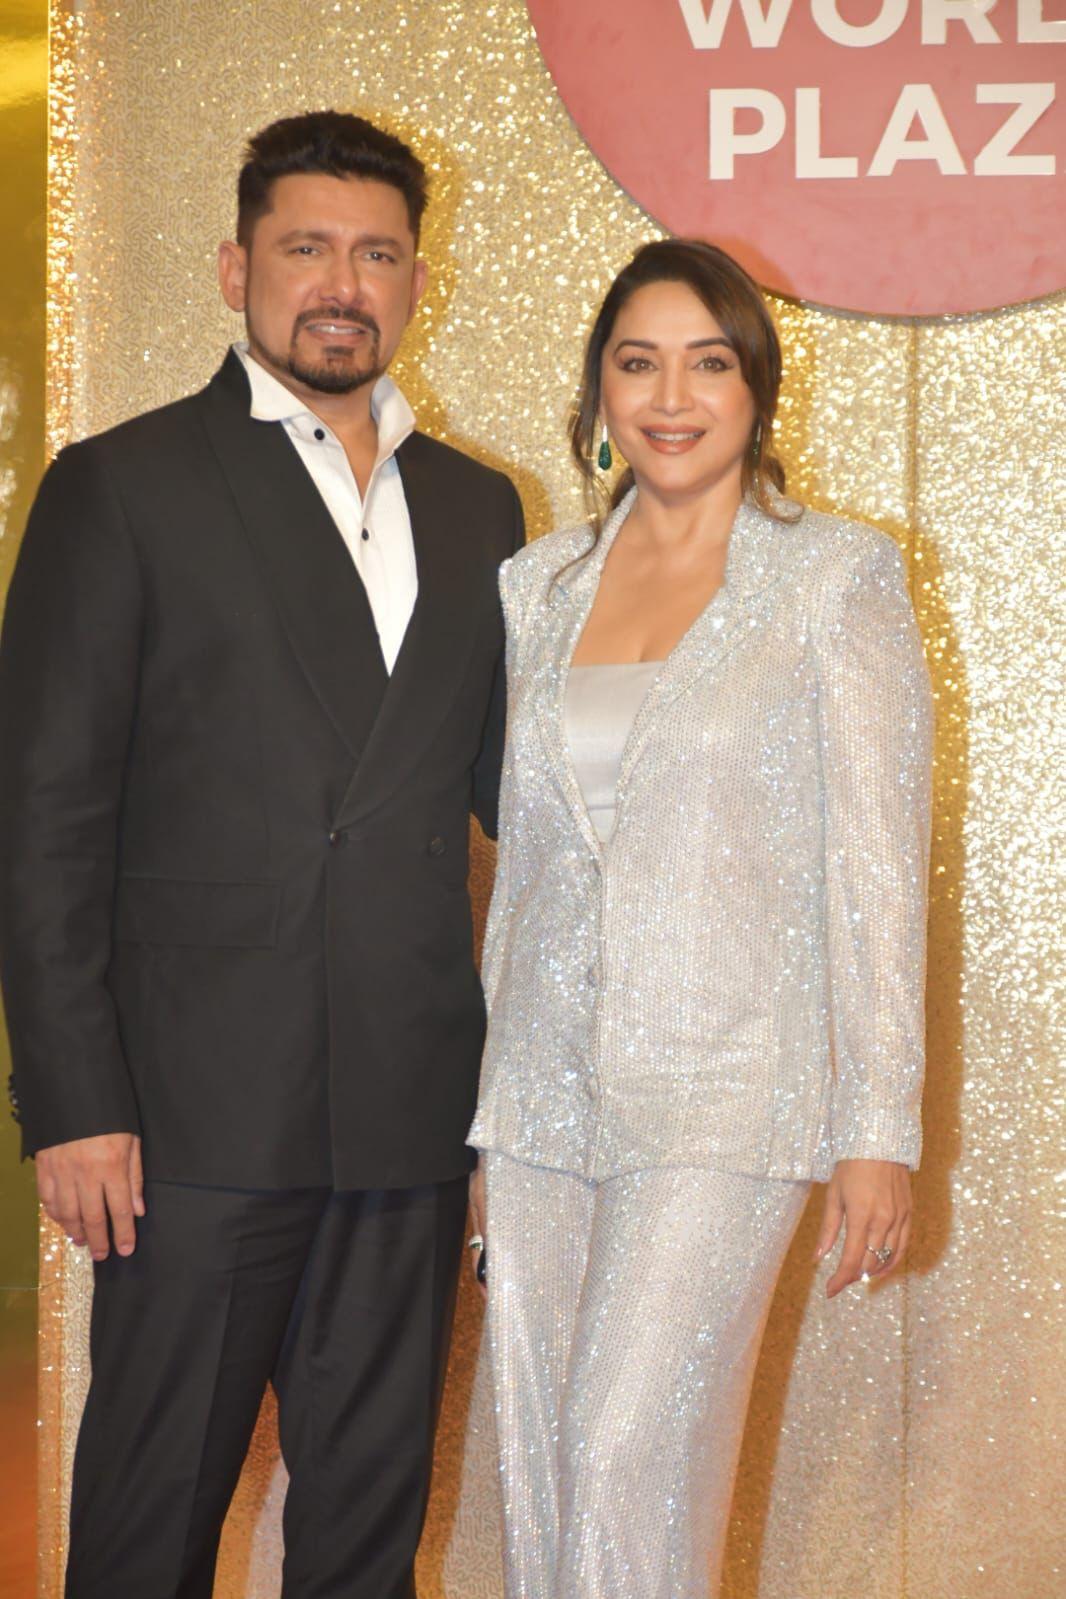 Madhuri Dixit and Dr.Nene attended the event last night. Dr,.Nene was dressed in a sharp suit while Madhuri was a shimmery vision